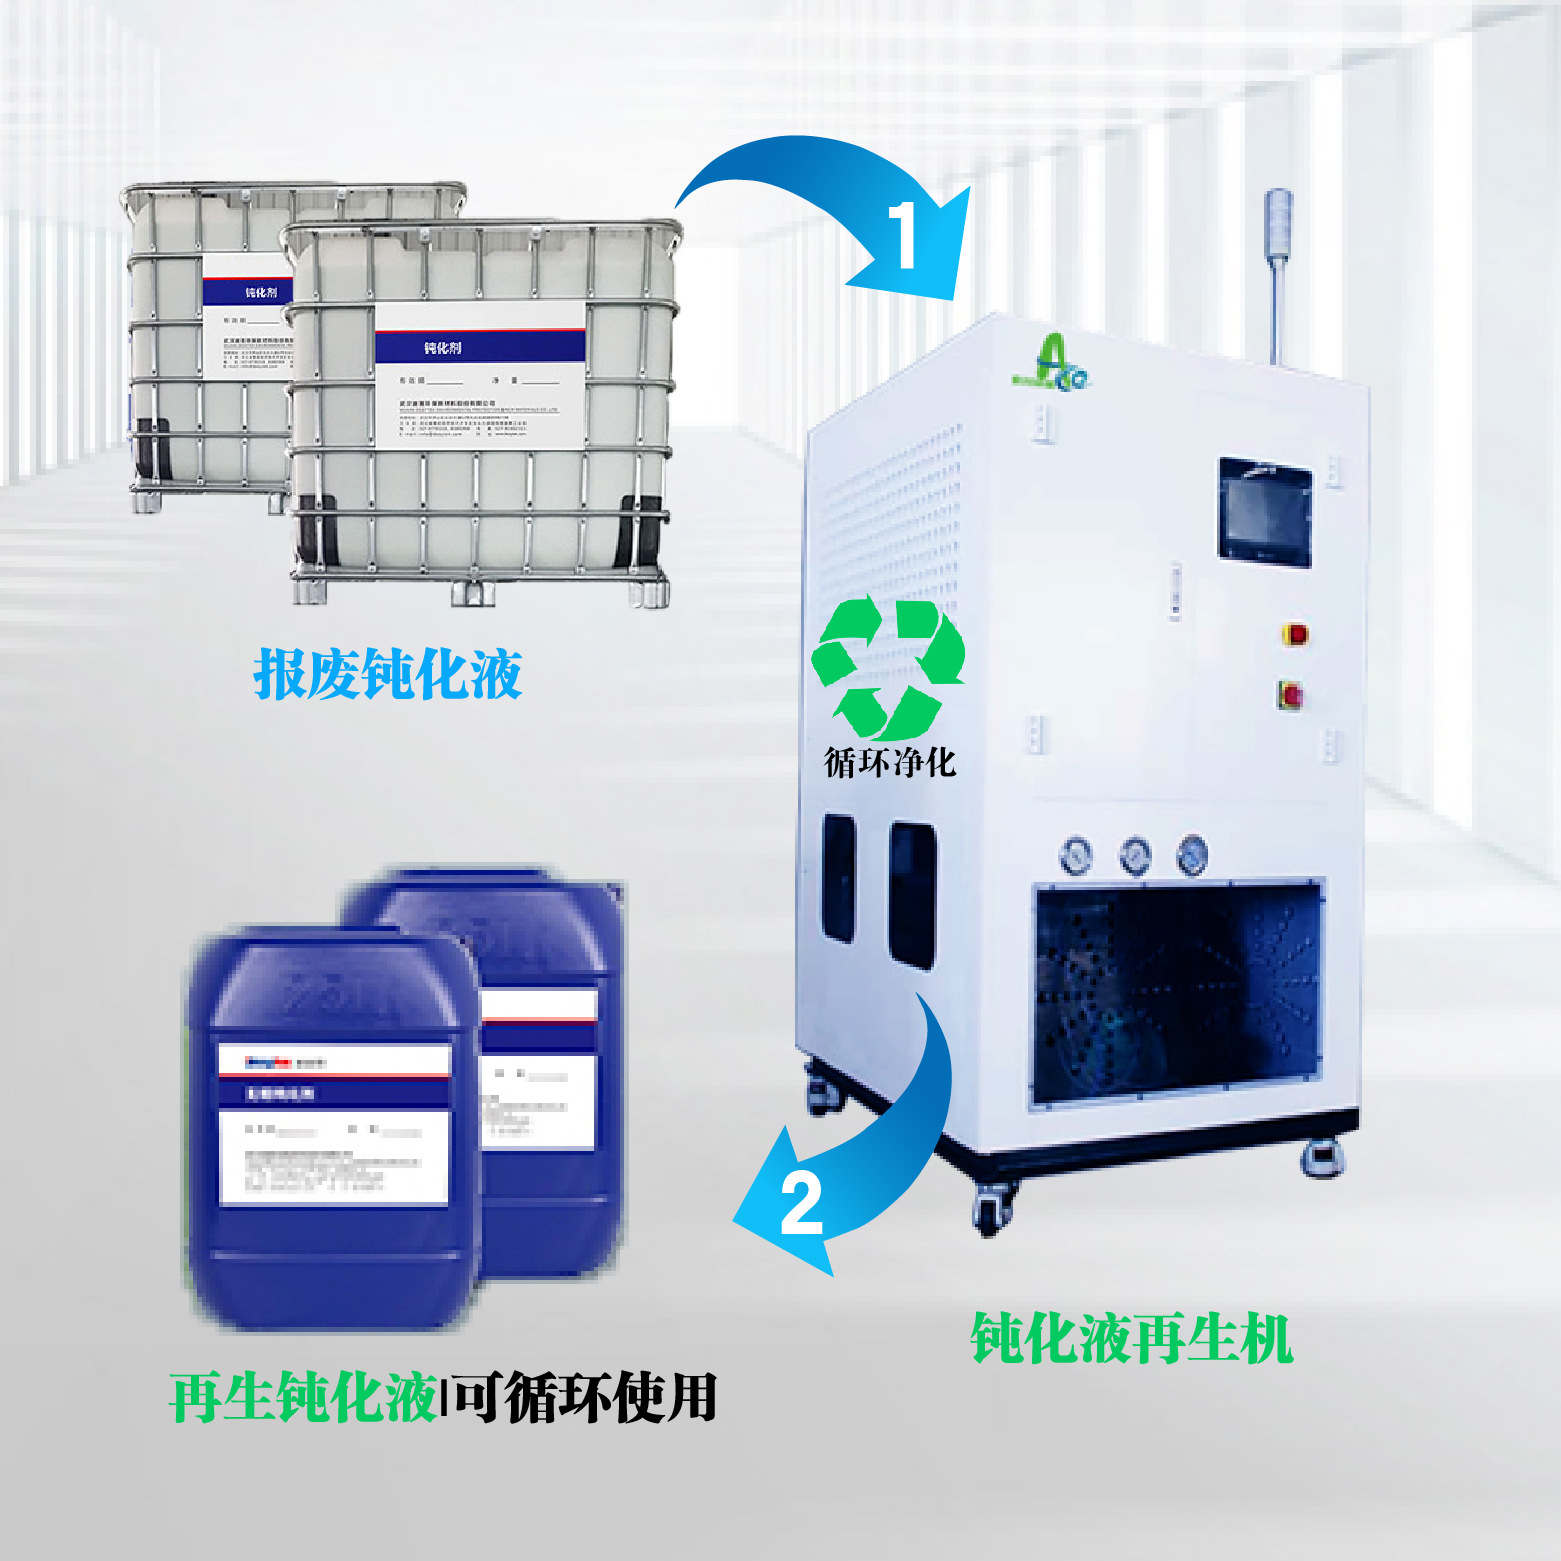 electroplate Waste liquid Passivation liquid reduction/Reuse/recovery/Regeneration equipment The passivation solution